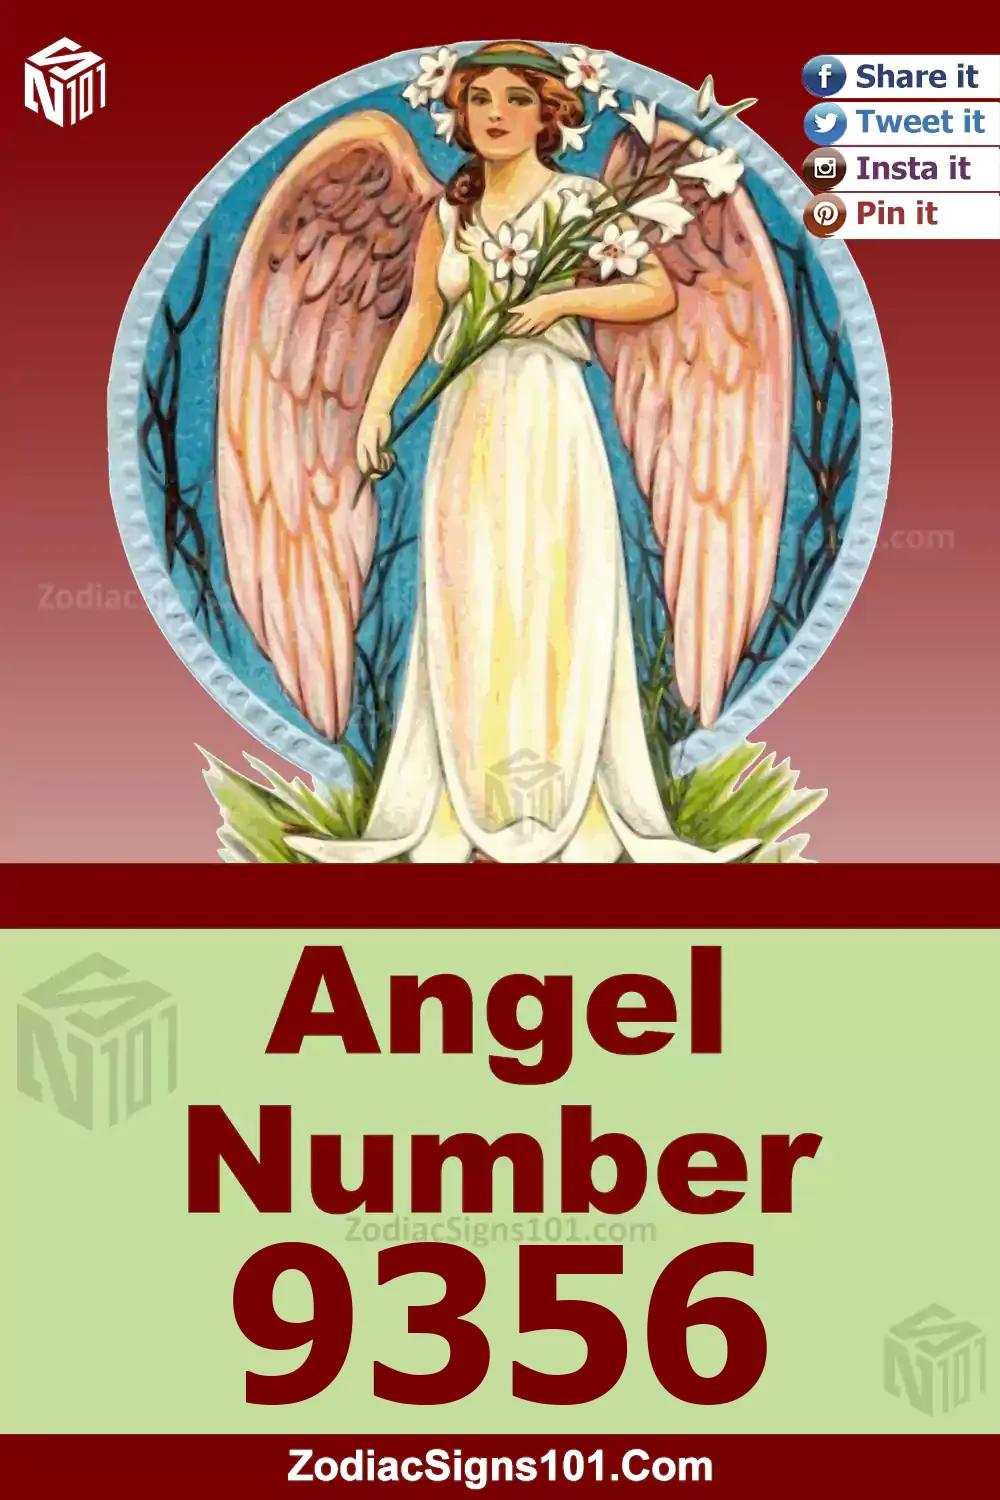 9356 Angel Number Meaning